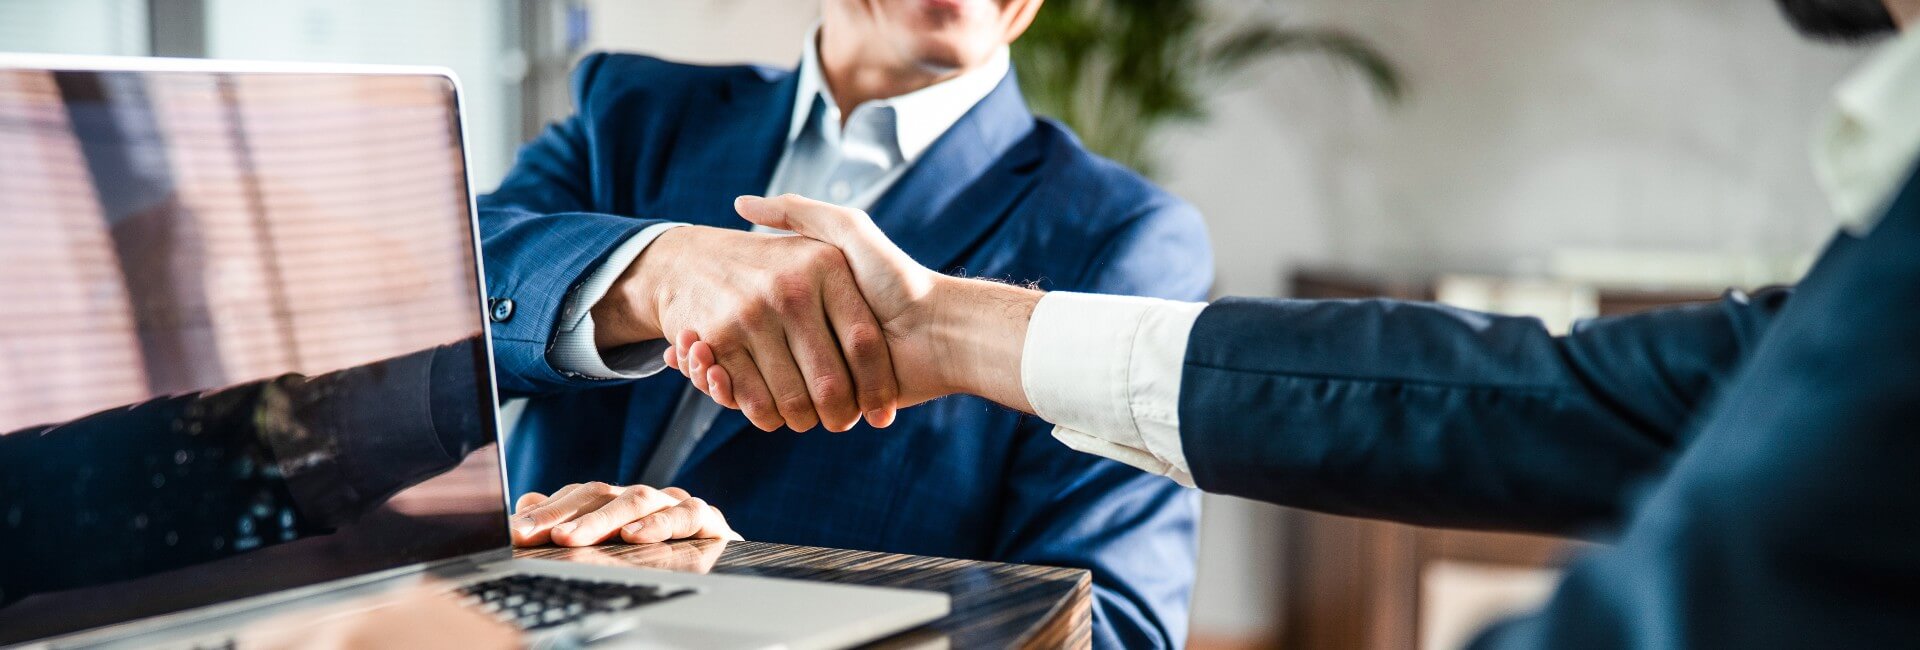 Business Insurance agents shaking hands